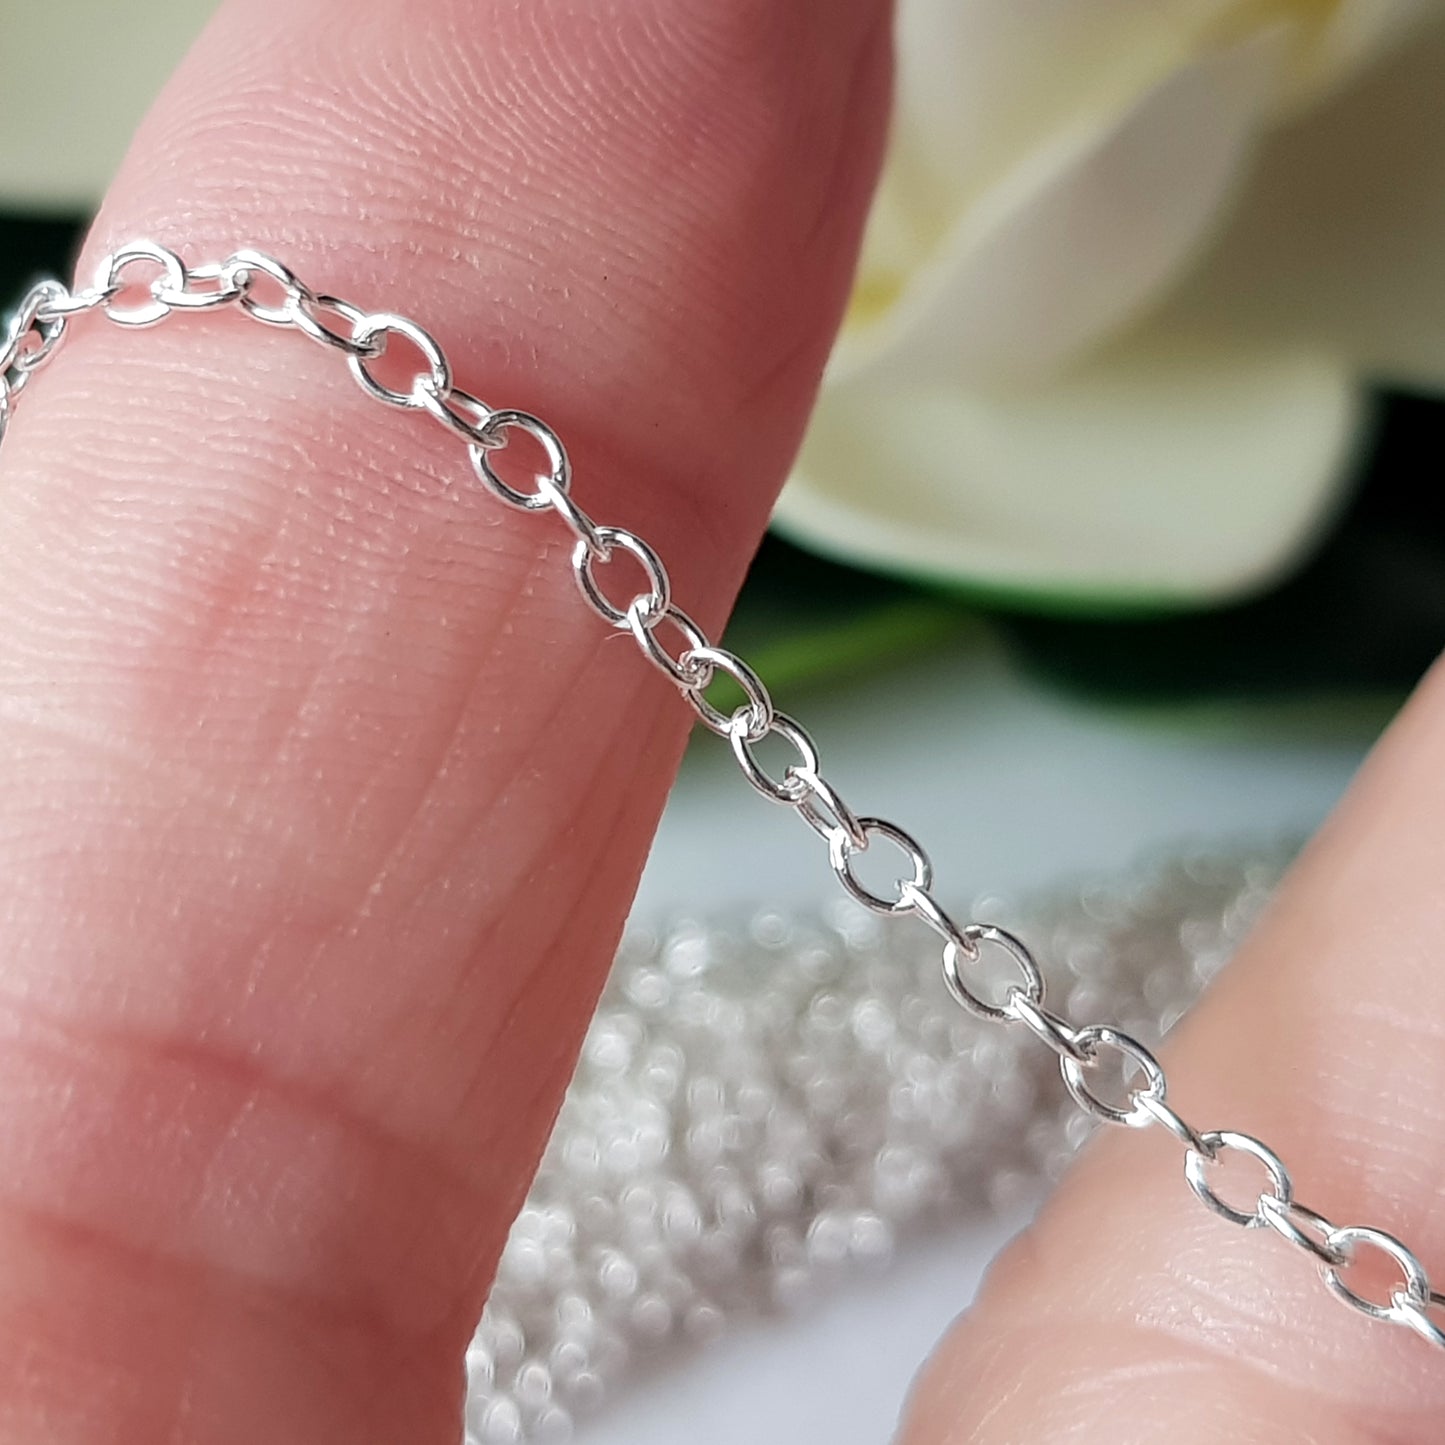 Chains - Long Cable Chain Genuine Sterling Silver Unfinished | Jewellery Making Supply